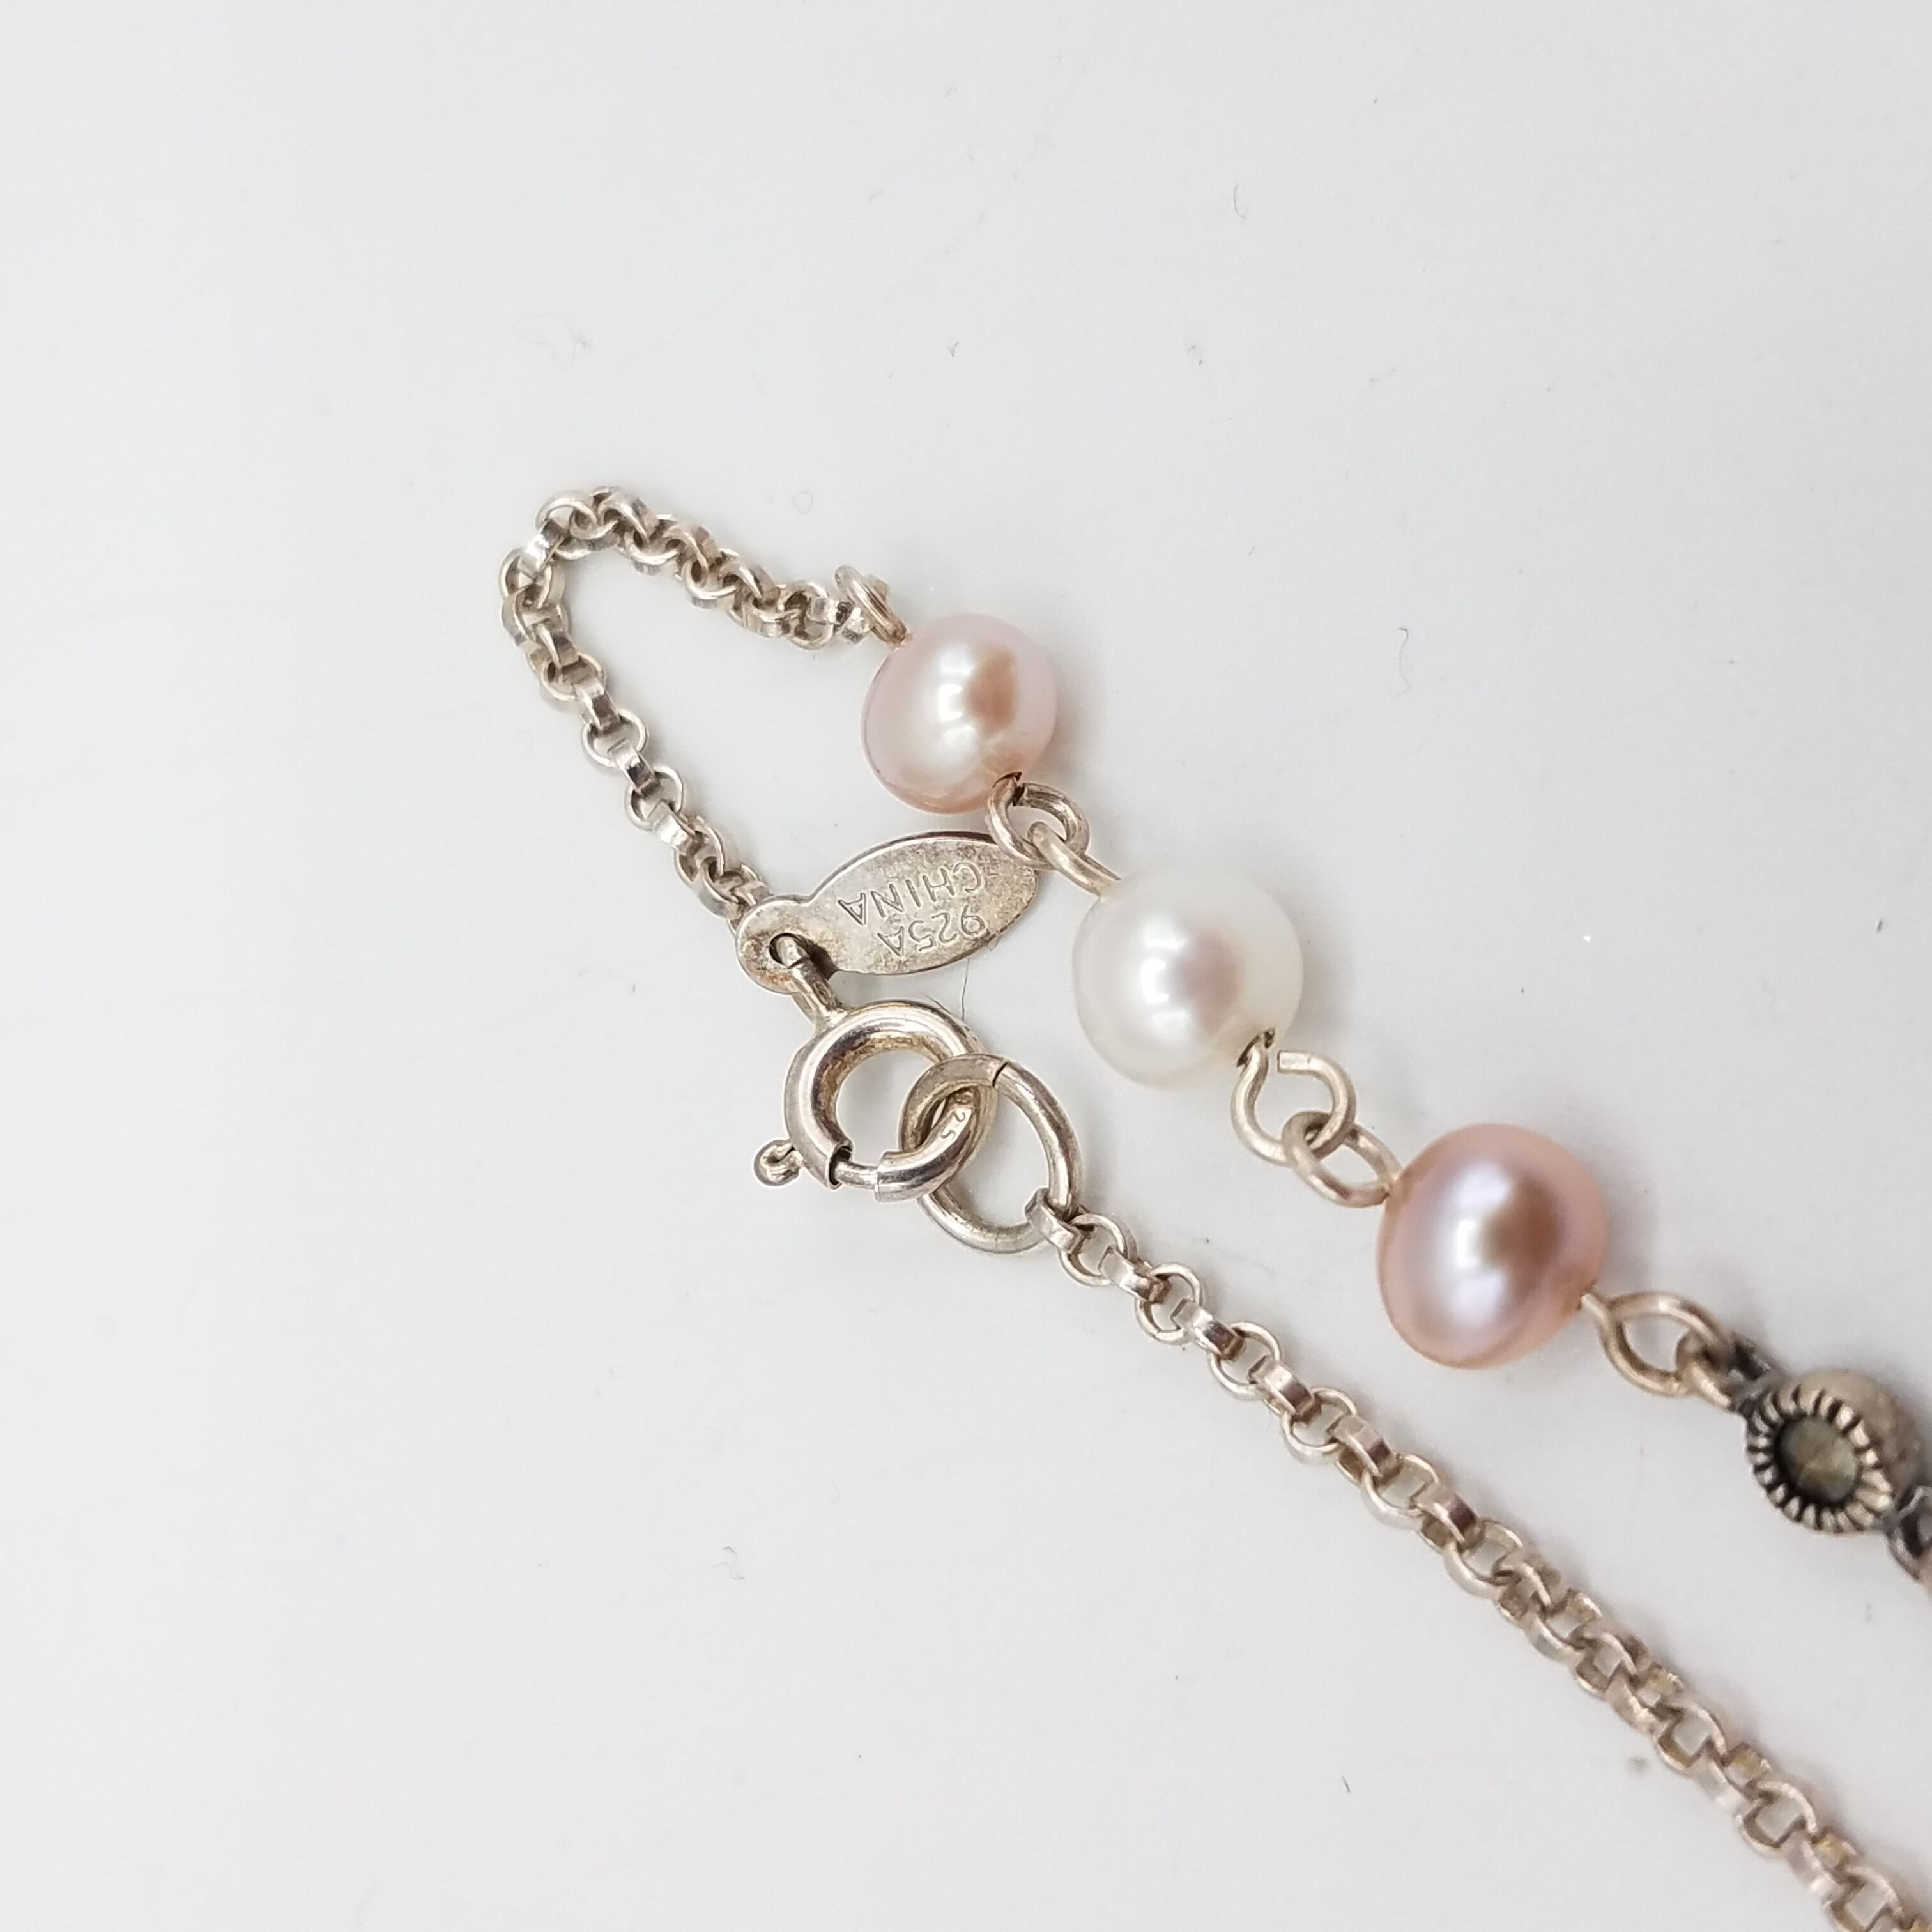 Buy the 925 Silver Genuine Pearl Beaded Station Chain Necklace